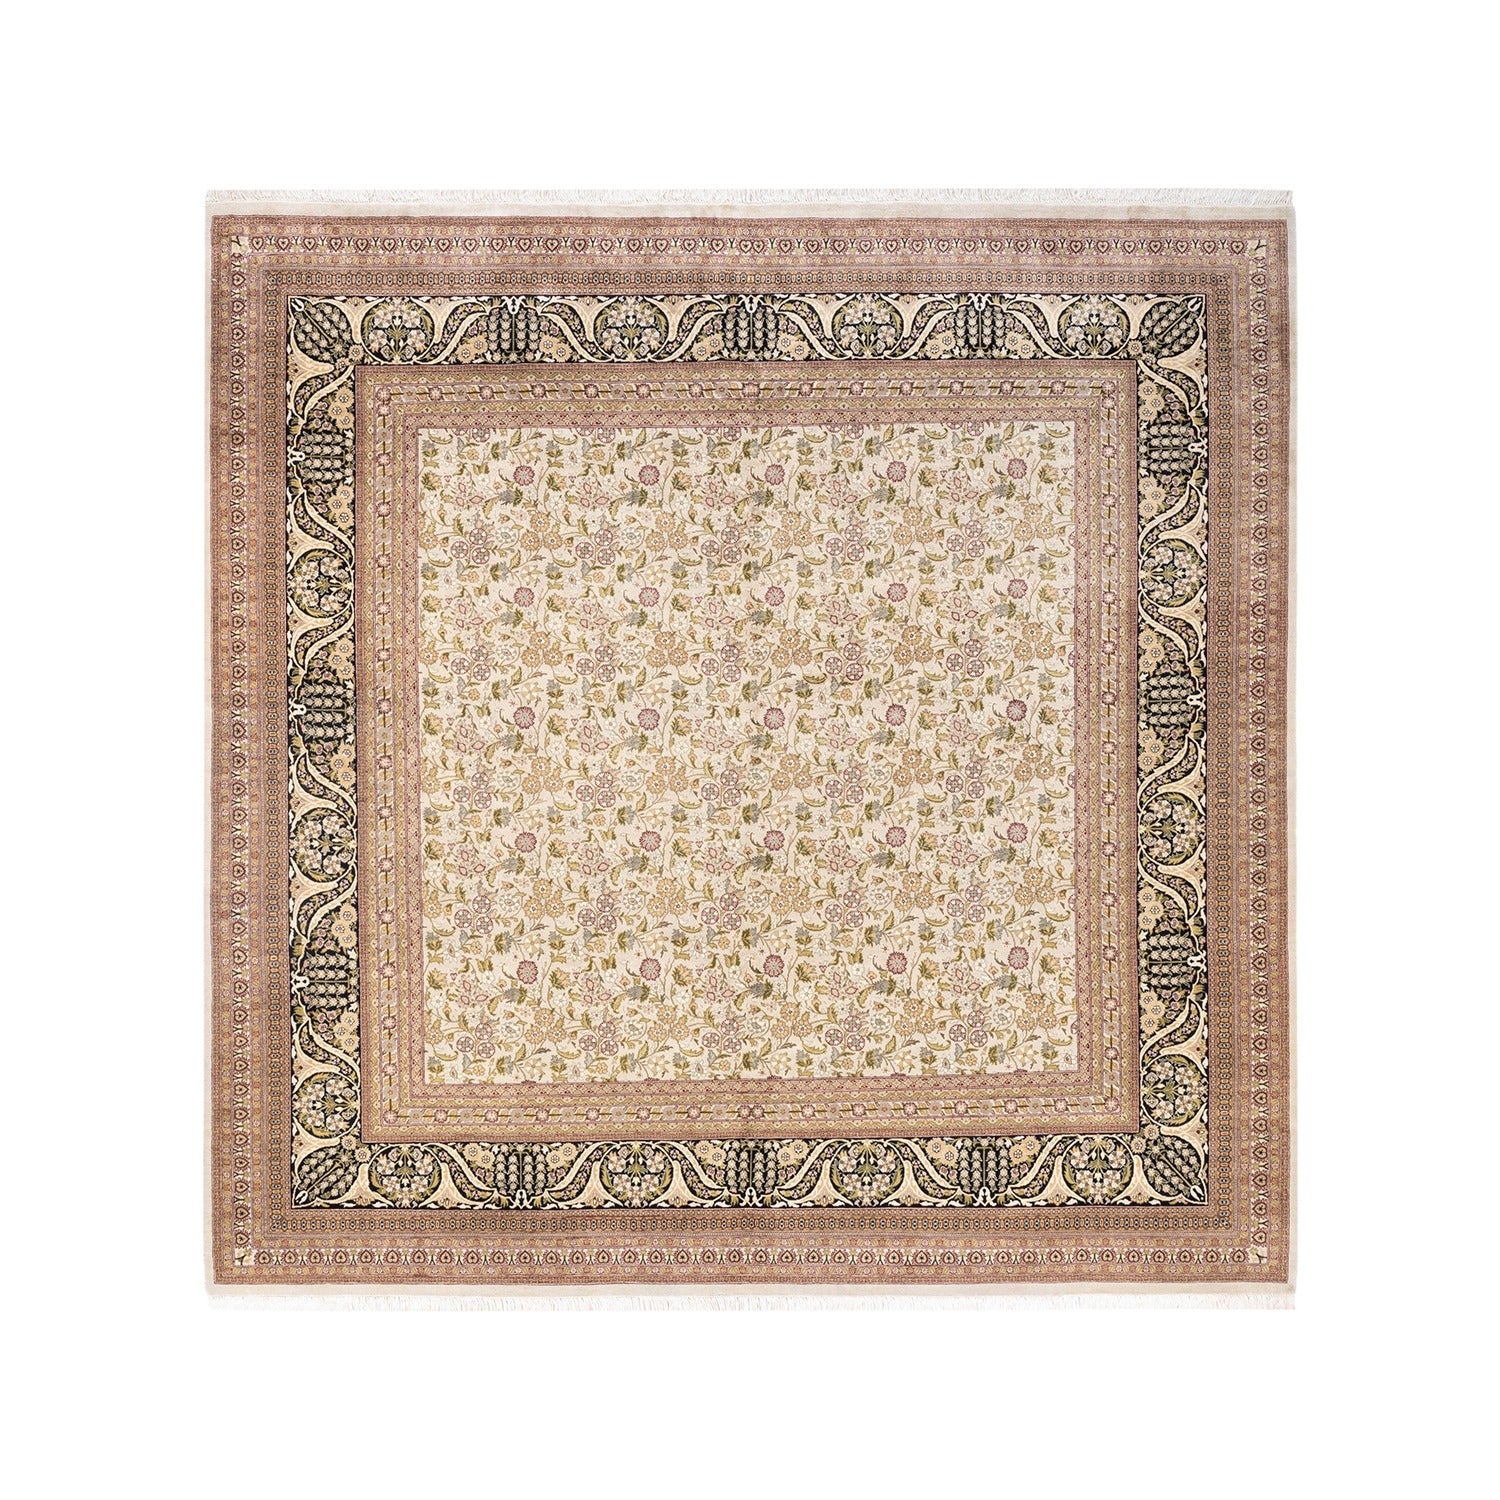 Exquisite square-shaped ornamental rug with intricate floral motifs and borders